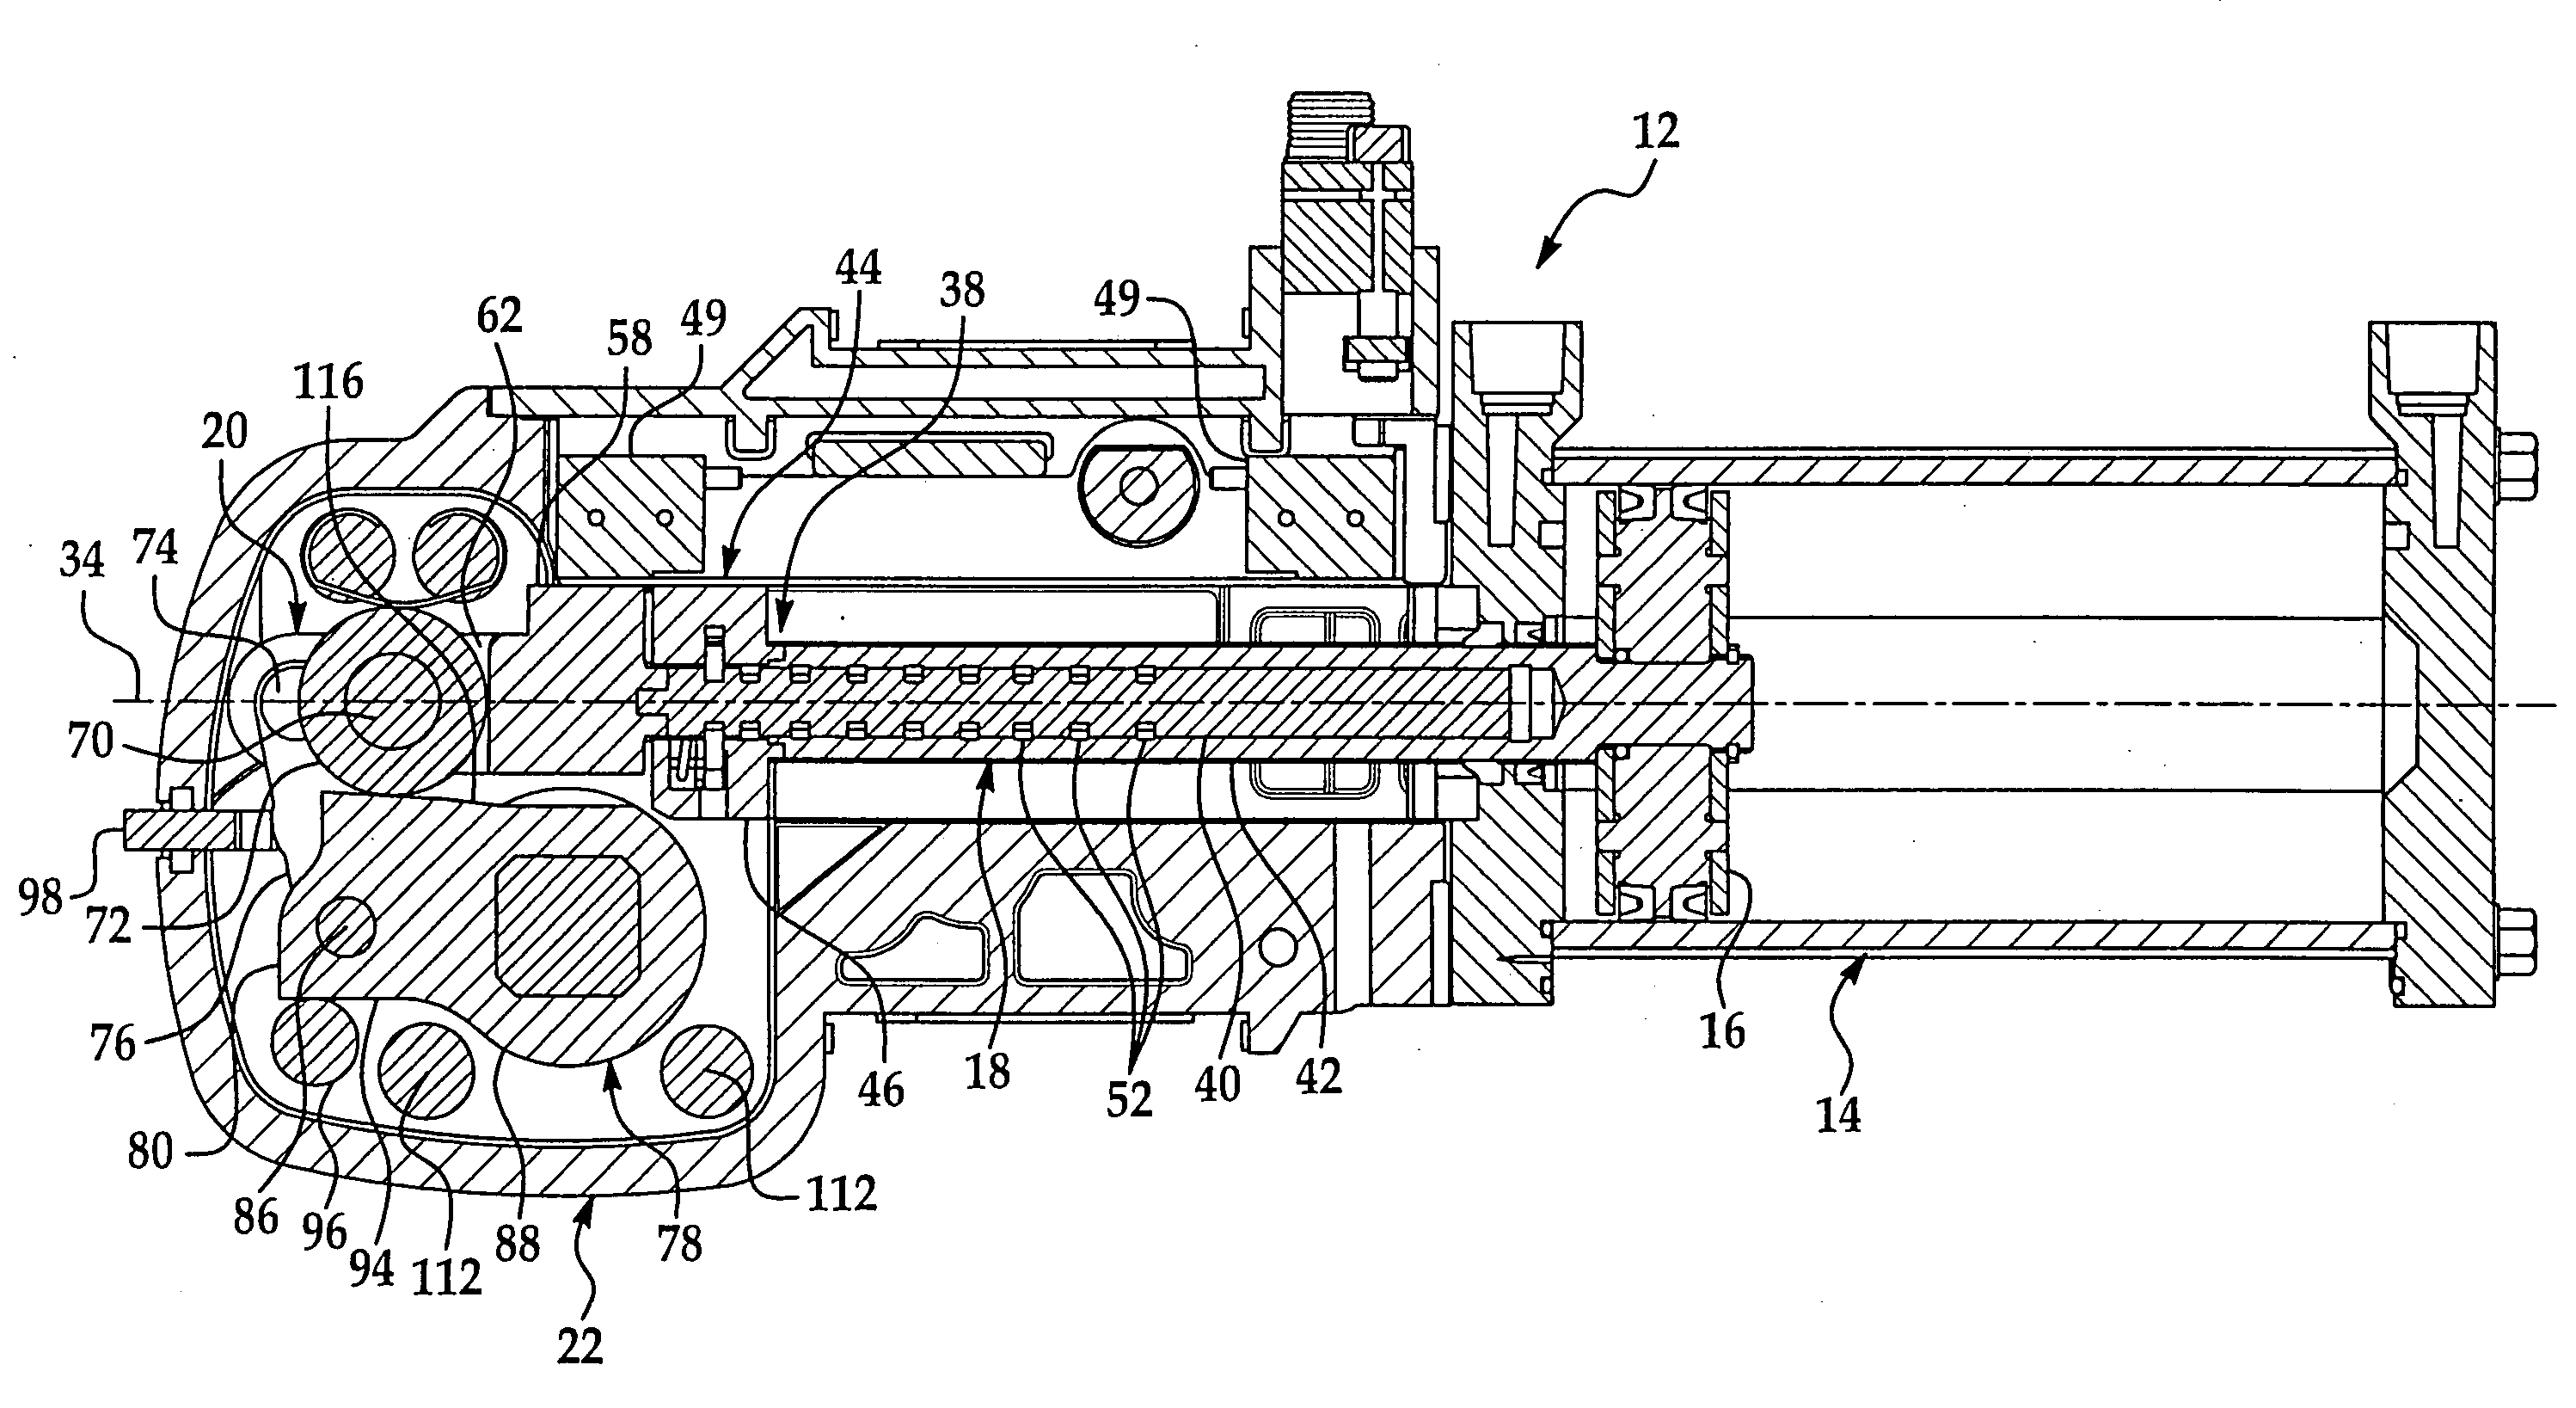 Structure for isolating mounting and clamping forces of a power clamp